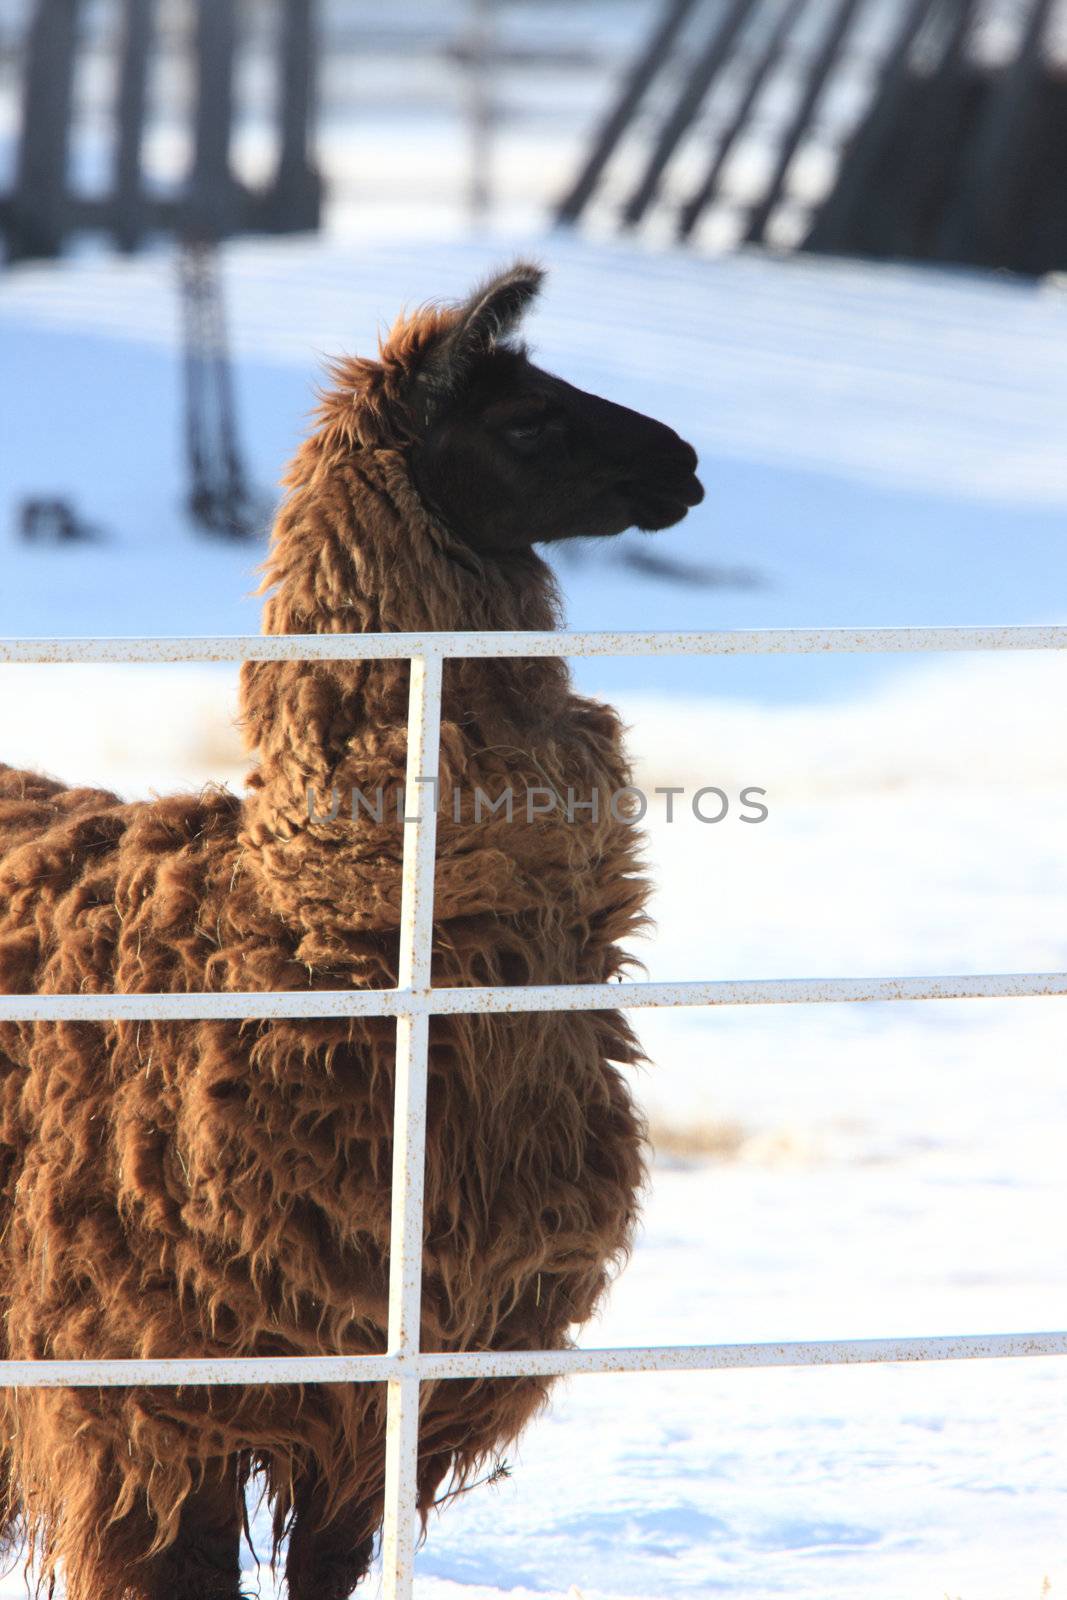 Llama in Snow Winter Canada by pictureguy